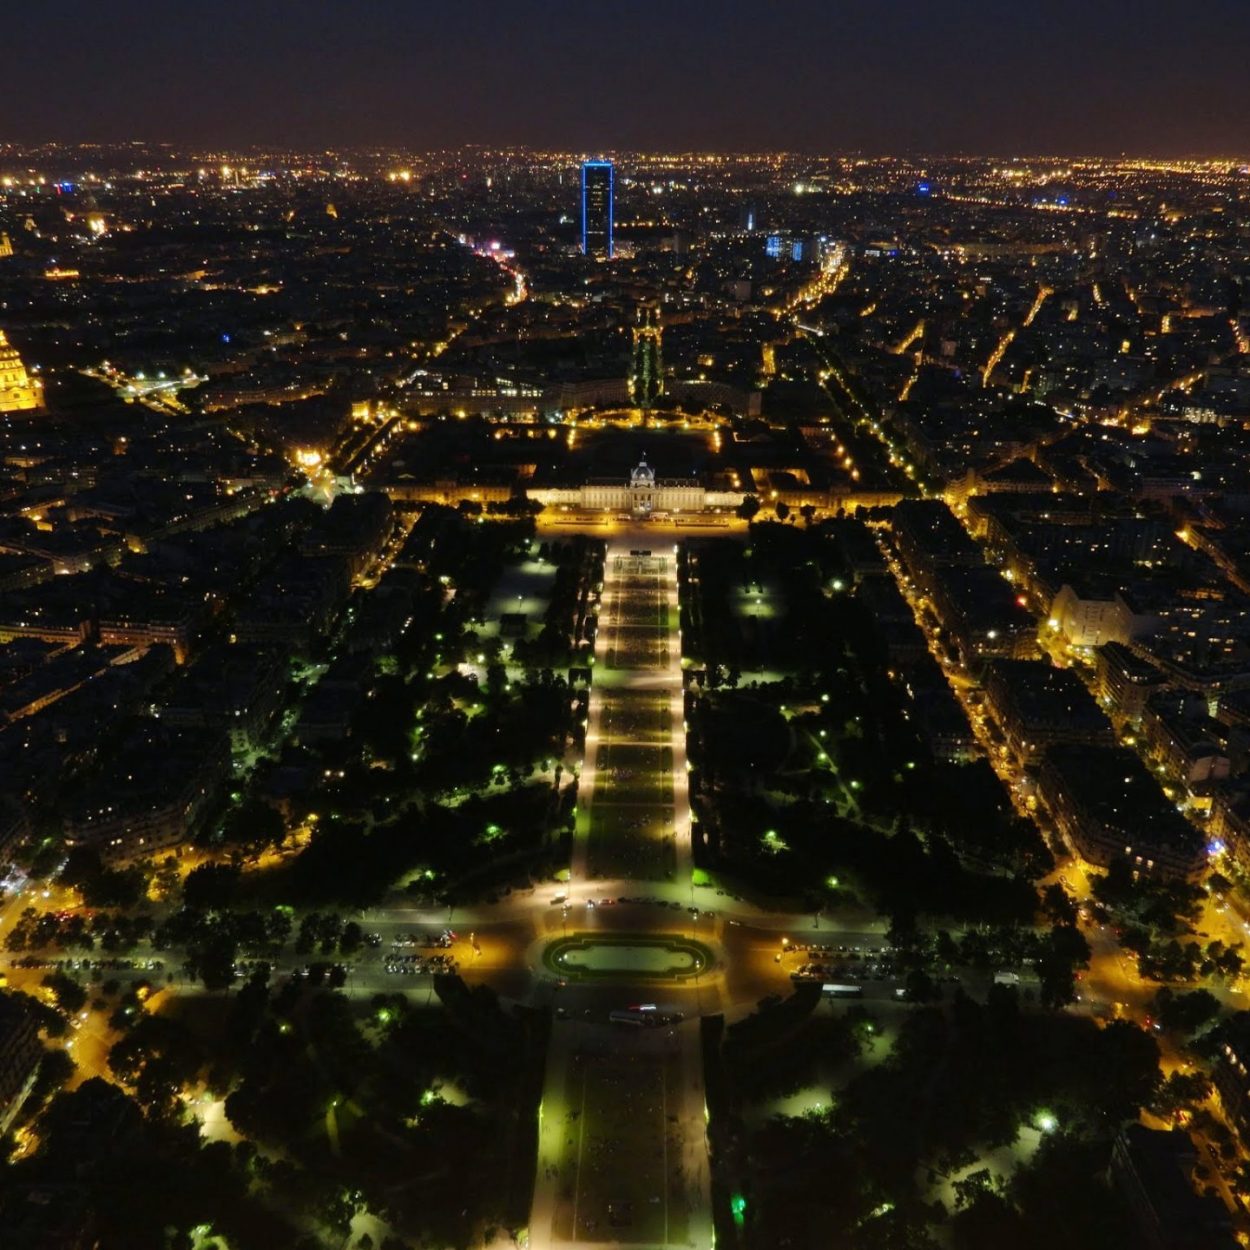 Night view of the city of Paris from the top floor of the Eiffel Tower.